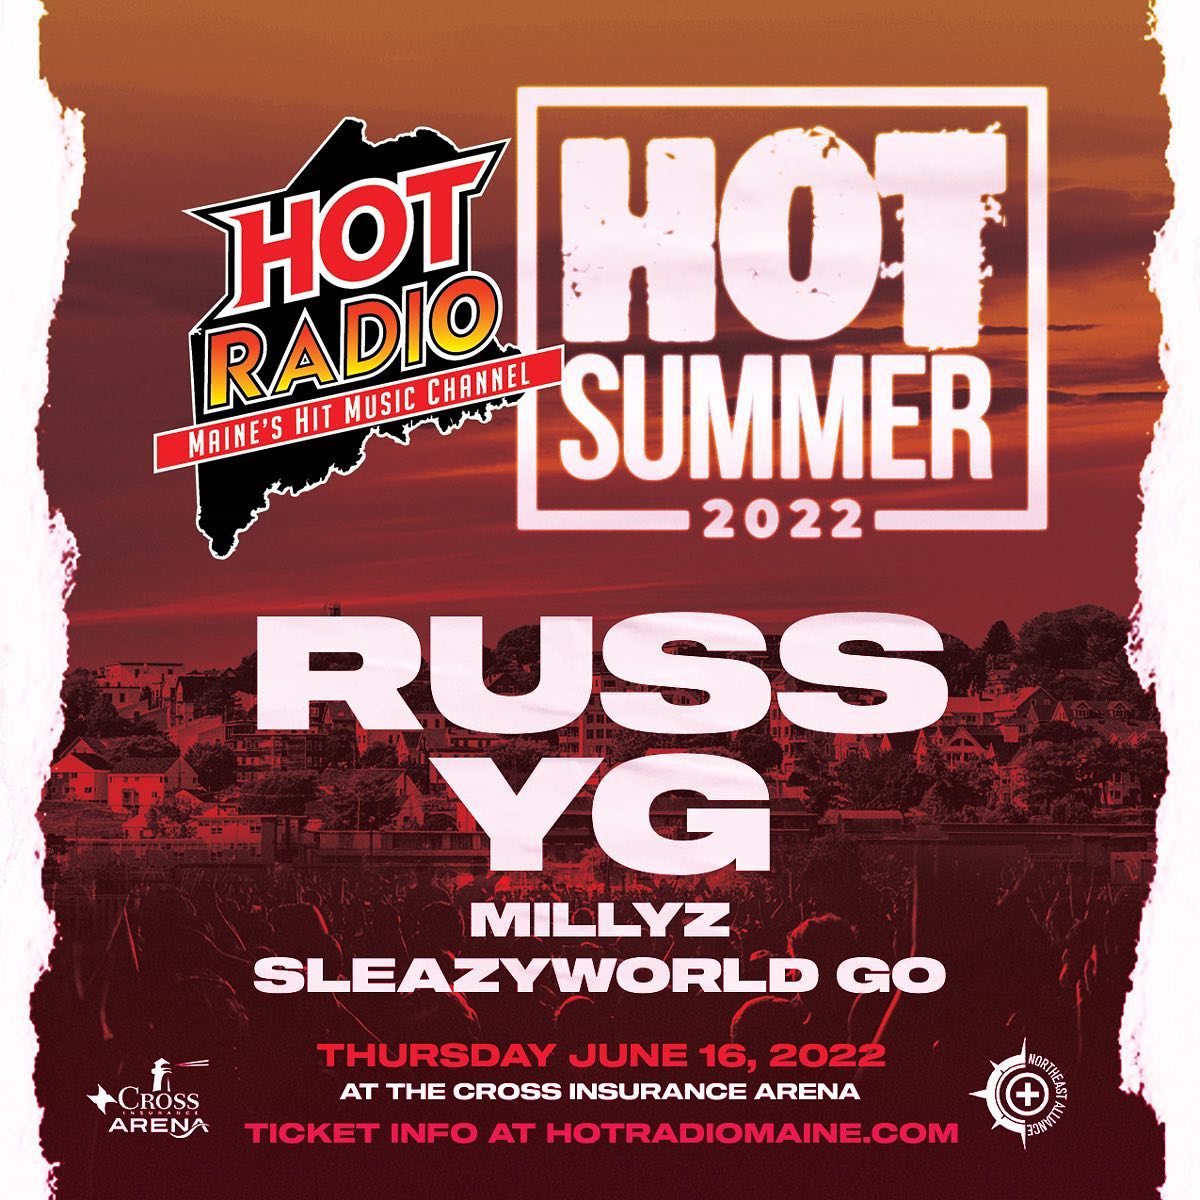 🚨 GIVEAWAY 🚨 We’ve got your chance to win a pair of tickets to HOT SUMMER!! To enter, tag your concert buddy in the comments & SHARE this post to your IG story.  Unlimited entries allowed, go crazy! Winners will be chosen at random by 12pm Monday 4/16.